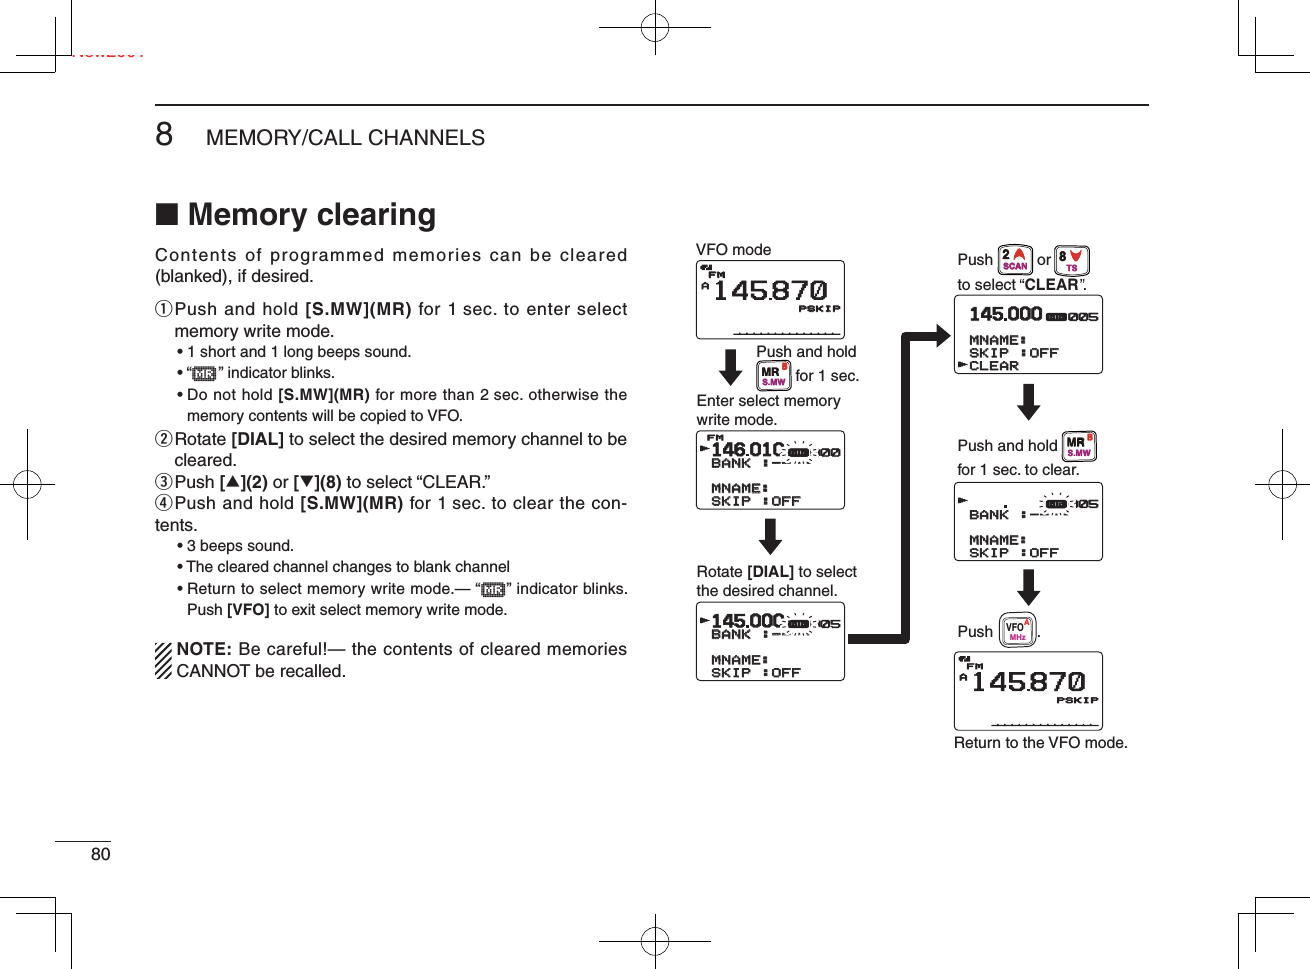 Ne808MEMORY/CALL CHANNELSNew2001■ Memory clearingContents of programmed memories can be cleared (blanked), if desired.q  Push and hold [S.MW](MR) for 1 sec. to enter select memory write mode.• 1 short and 1 long beeps sound.• “μ    ” indicator blinks.•  Do not hold [S.MW](MR) for more than 2 sec. otherwise the memory contents will be copied to VFO.w  Rotate [DIAL] to select the desired memory channel to be cleared.e  Push [∫](2) or [√](8) to select “CLEAR.”r Push and hold [S.MW](MR) for 1 sec. to clear the con-tents.• 3 beeps sound.•  The cleared channel changes to blank channel•  Return to select memory write mode.— “μ   ” indicator blinks. Push [VFO] to exit select memory write mode.  NOTE: Be careful!— the contents of cleared memories CANNOT be recalled.146010010BANKBANK :----:----  MNAME:MNAME:SKIPSKIP :OFF:OFFFMrμ000145000000MNAME:MNAME:SKIPSKIP :OFF:OFFCLEARCLEARrμ005005AFMFM145870PSKIPPSKIP145000000BANKBANK :----:----  MNAME:MNAME:SKIPSKIP :OFF:OFFrμ005BANKBANK :----:----  MNAME:MNAME:SKIPSKIP :OFF:OFFrμ005005AFM145870PSKIPPSKIPVFO modeRotate [DIAL] to selectthe desired channel.Push and hold for 1 sec. to clear.Push          .Return to the VFO mode.Enter select memory write mode.Push and hold         for 1 sec.Pushto select  CLEAR .orMRS.MWBMRS.MWB2SCAN8TSVFOMHzA